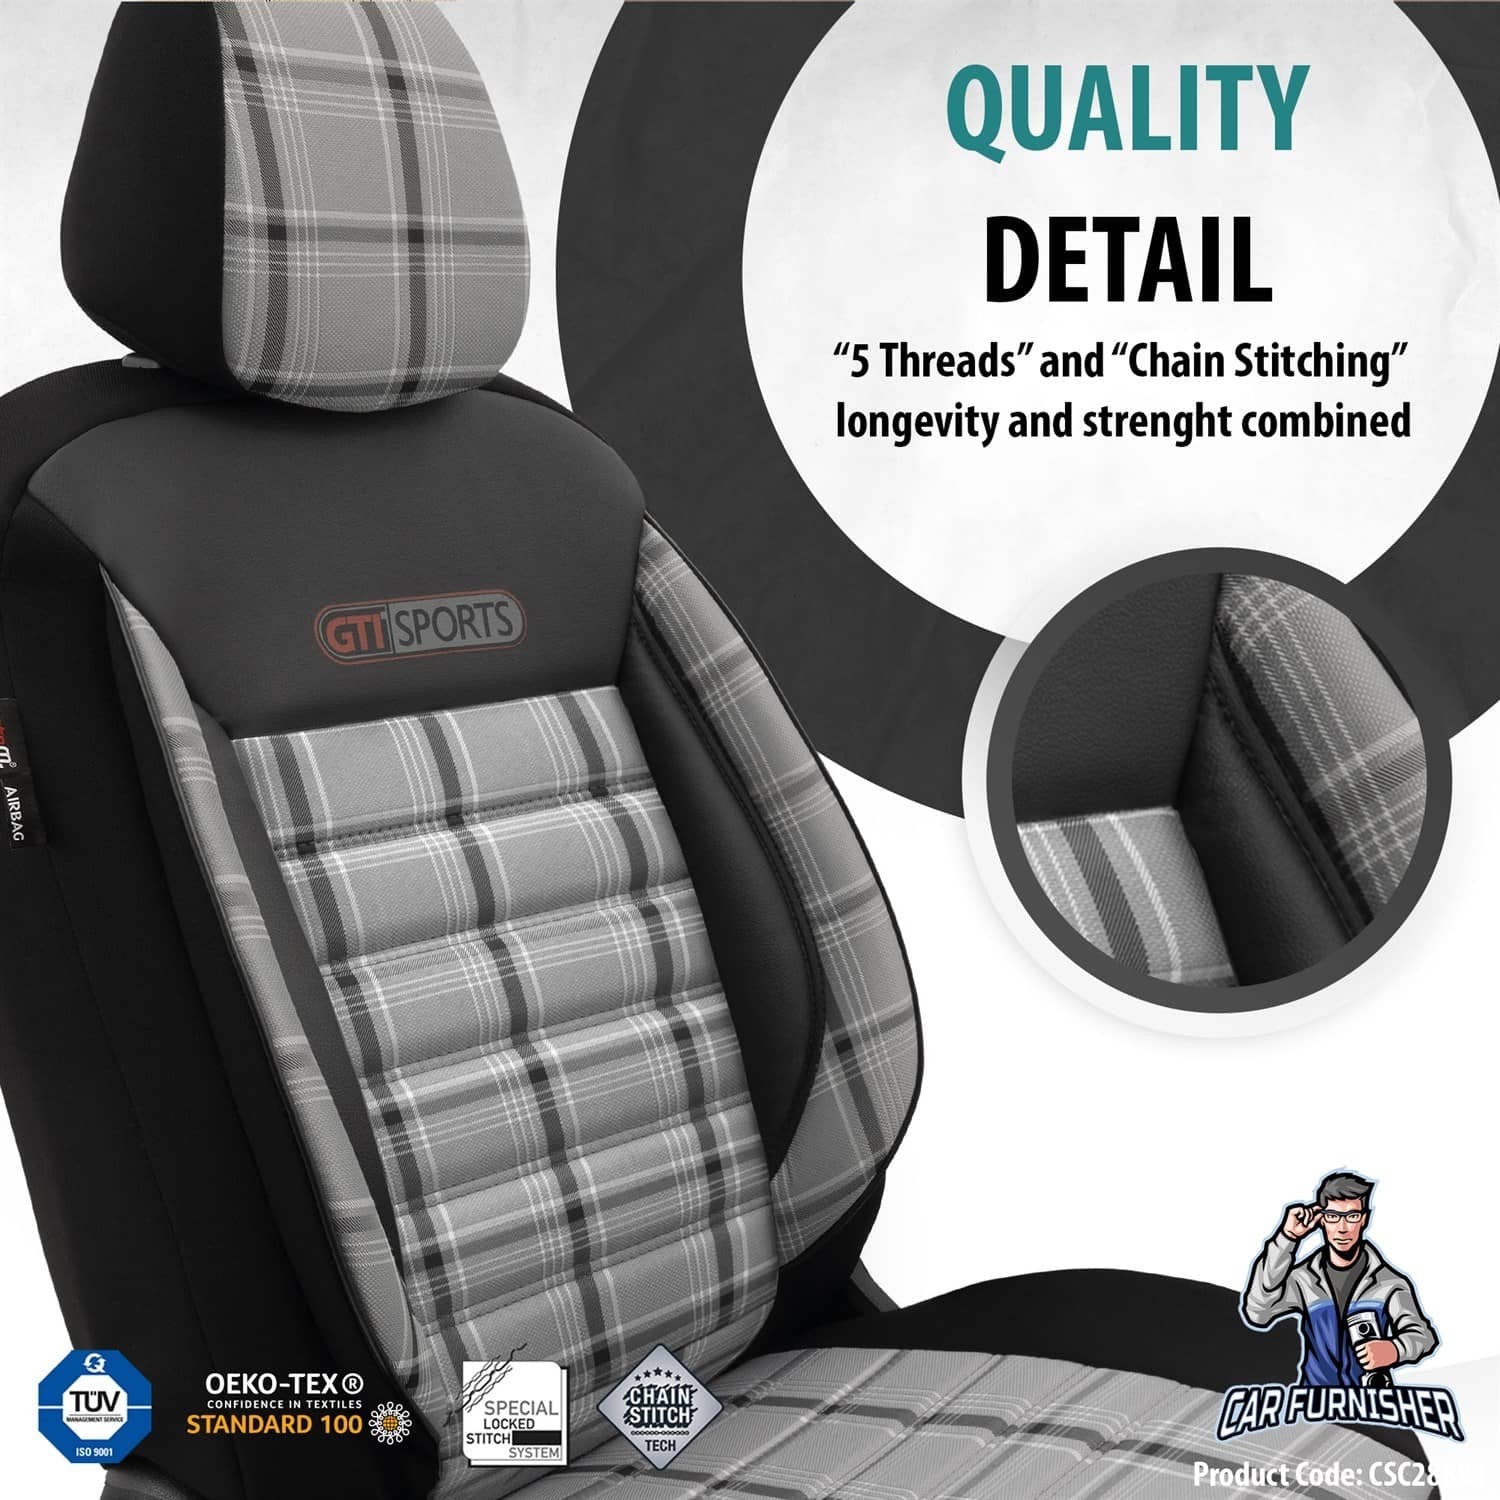 VW Golf GTI Car Seat Covers MK4/MK5/MK6/MK7 1998-2020 Special Series Silver Leather & Fabric